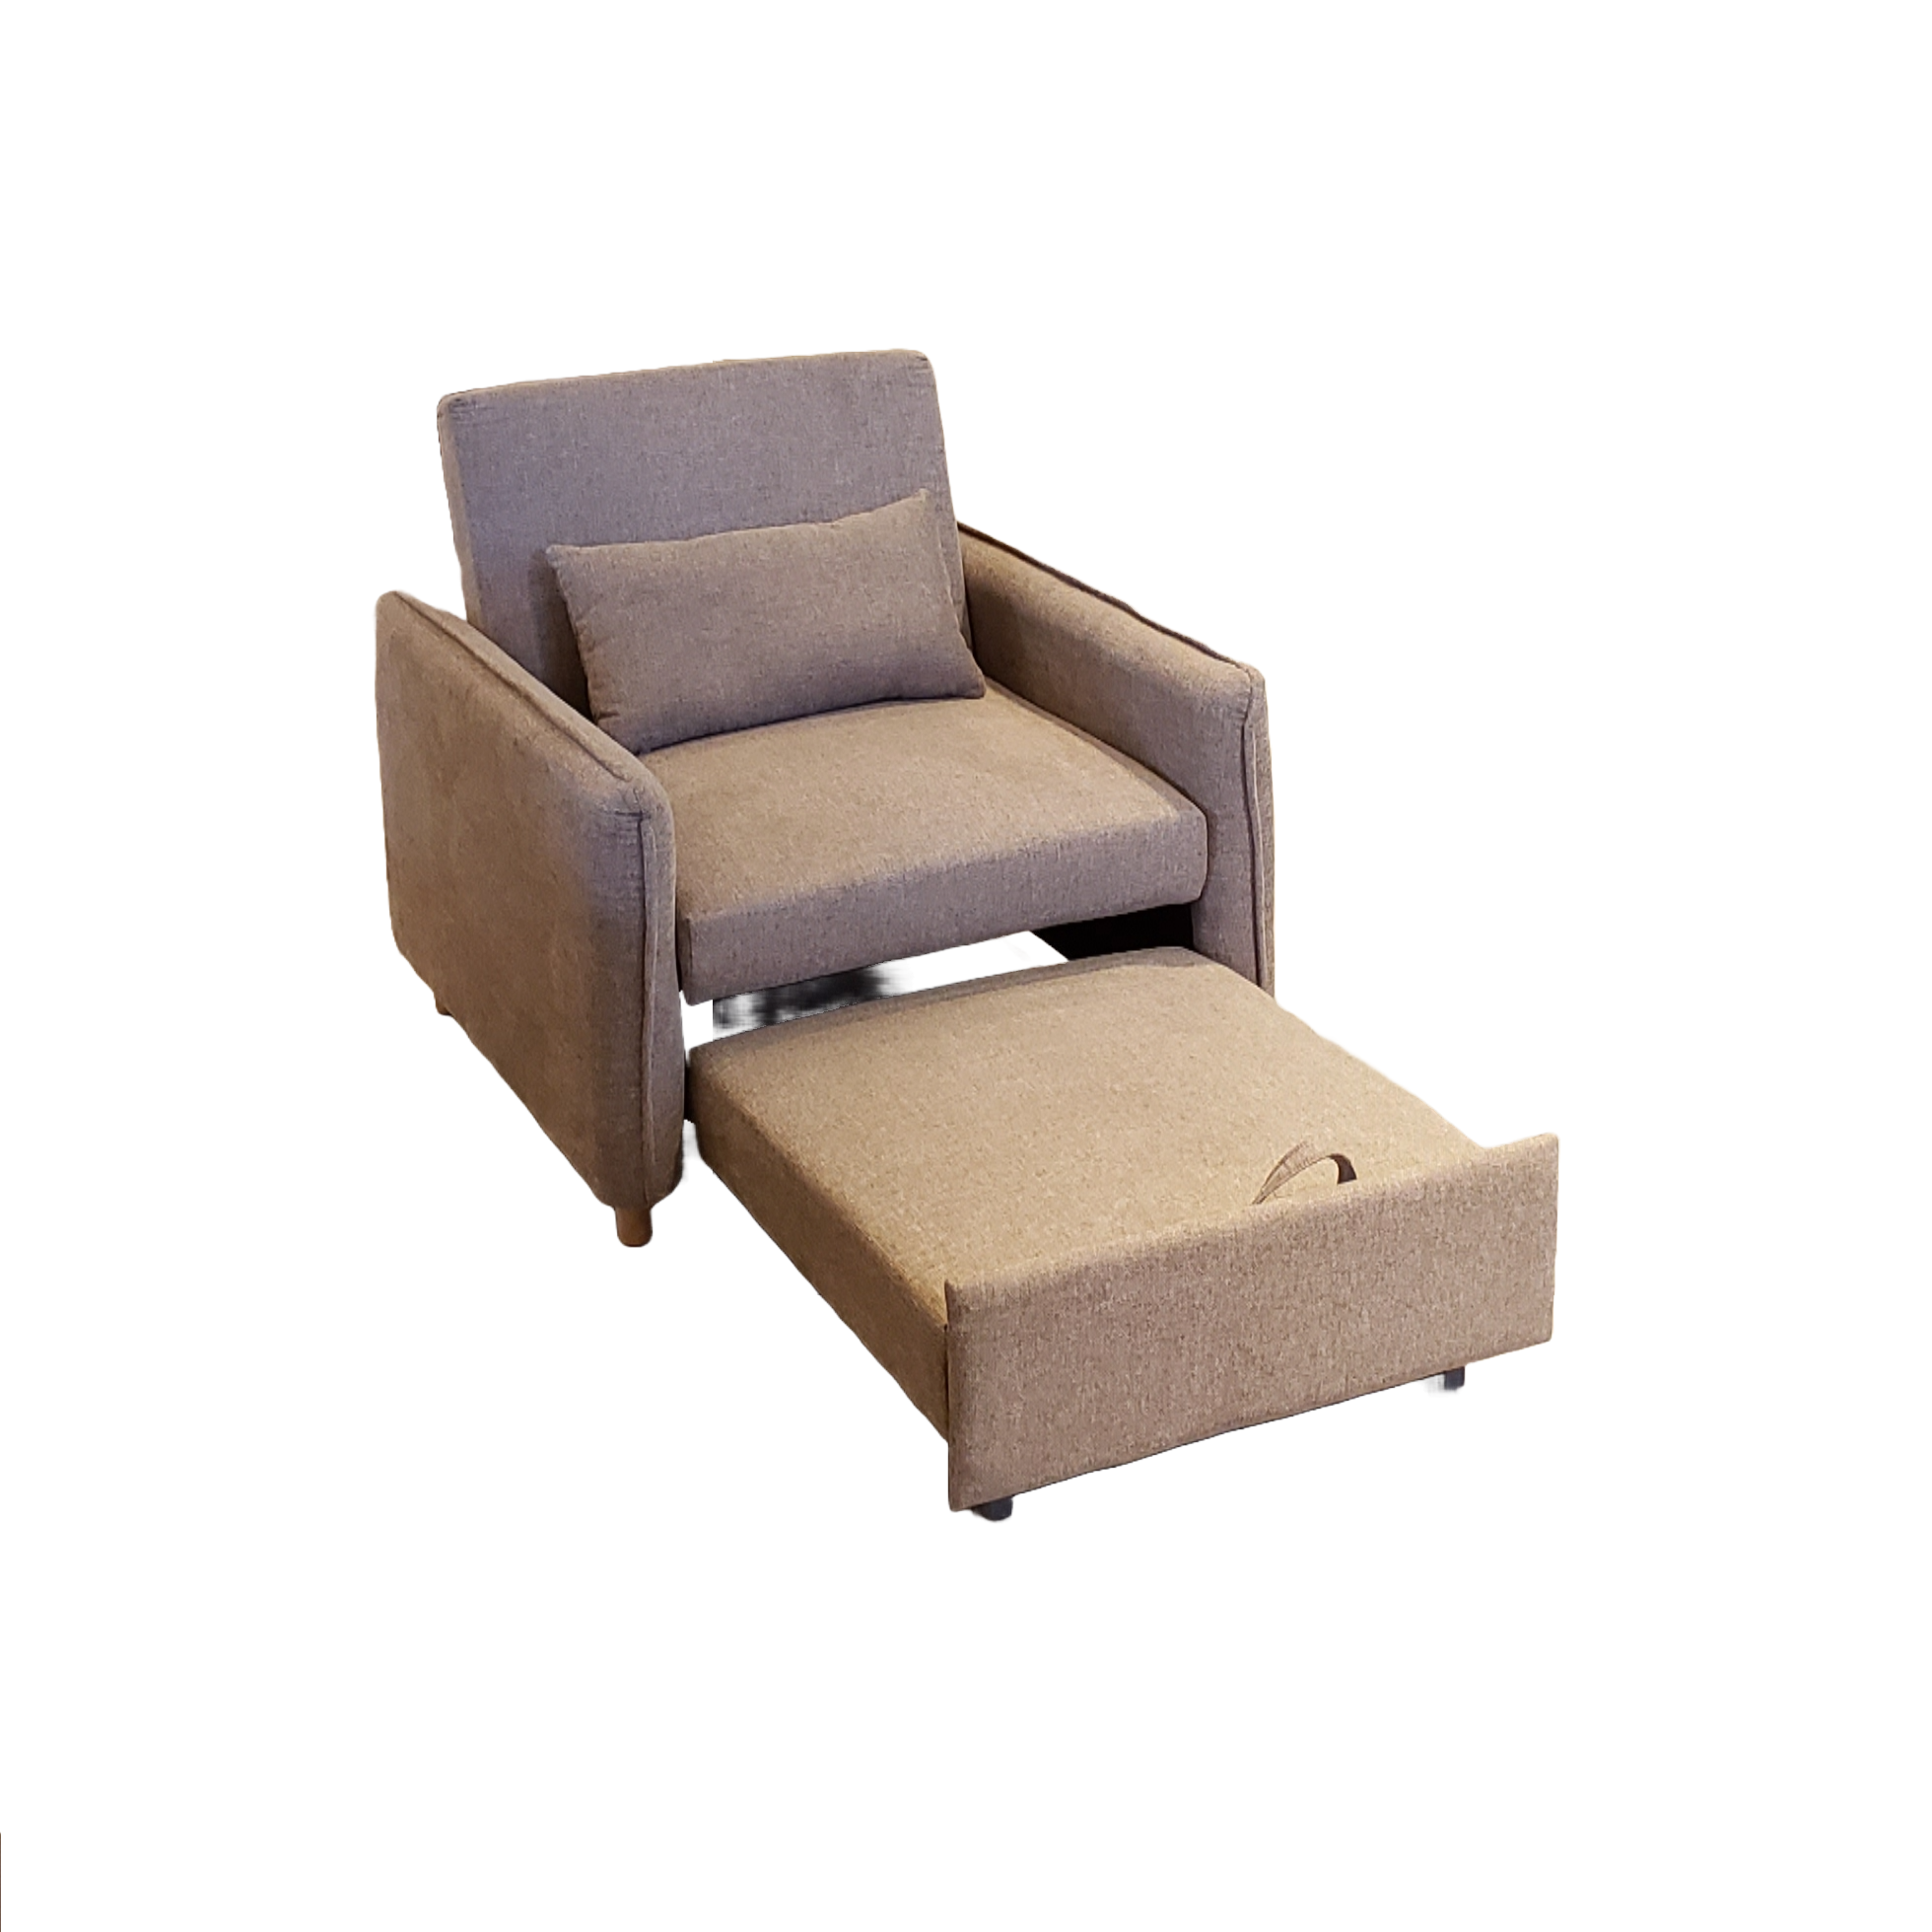 SF3383B 1 Seater Sofa Bed Cream (1).png